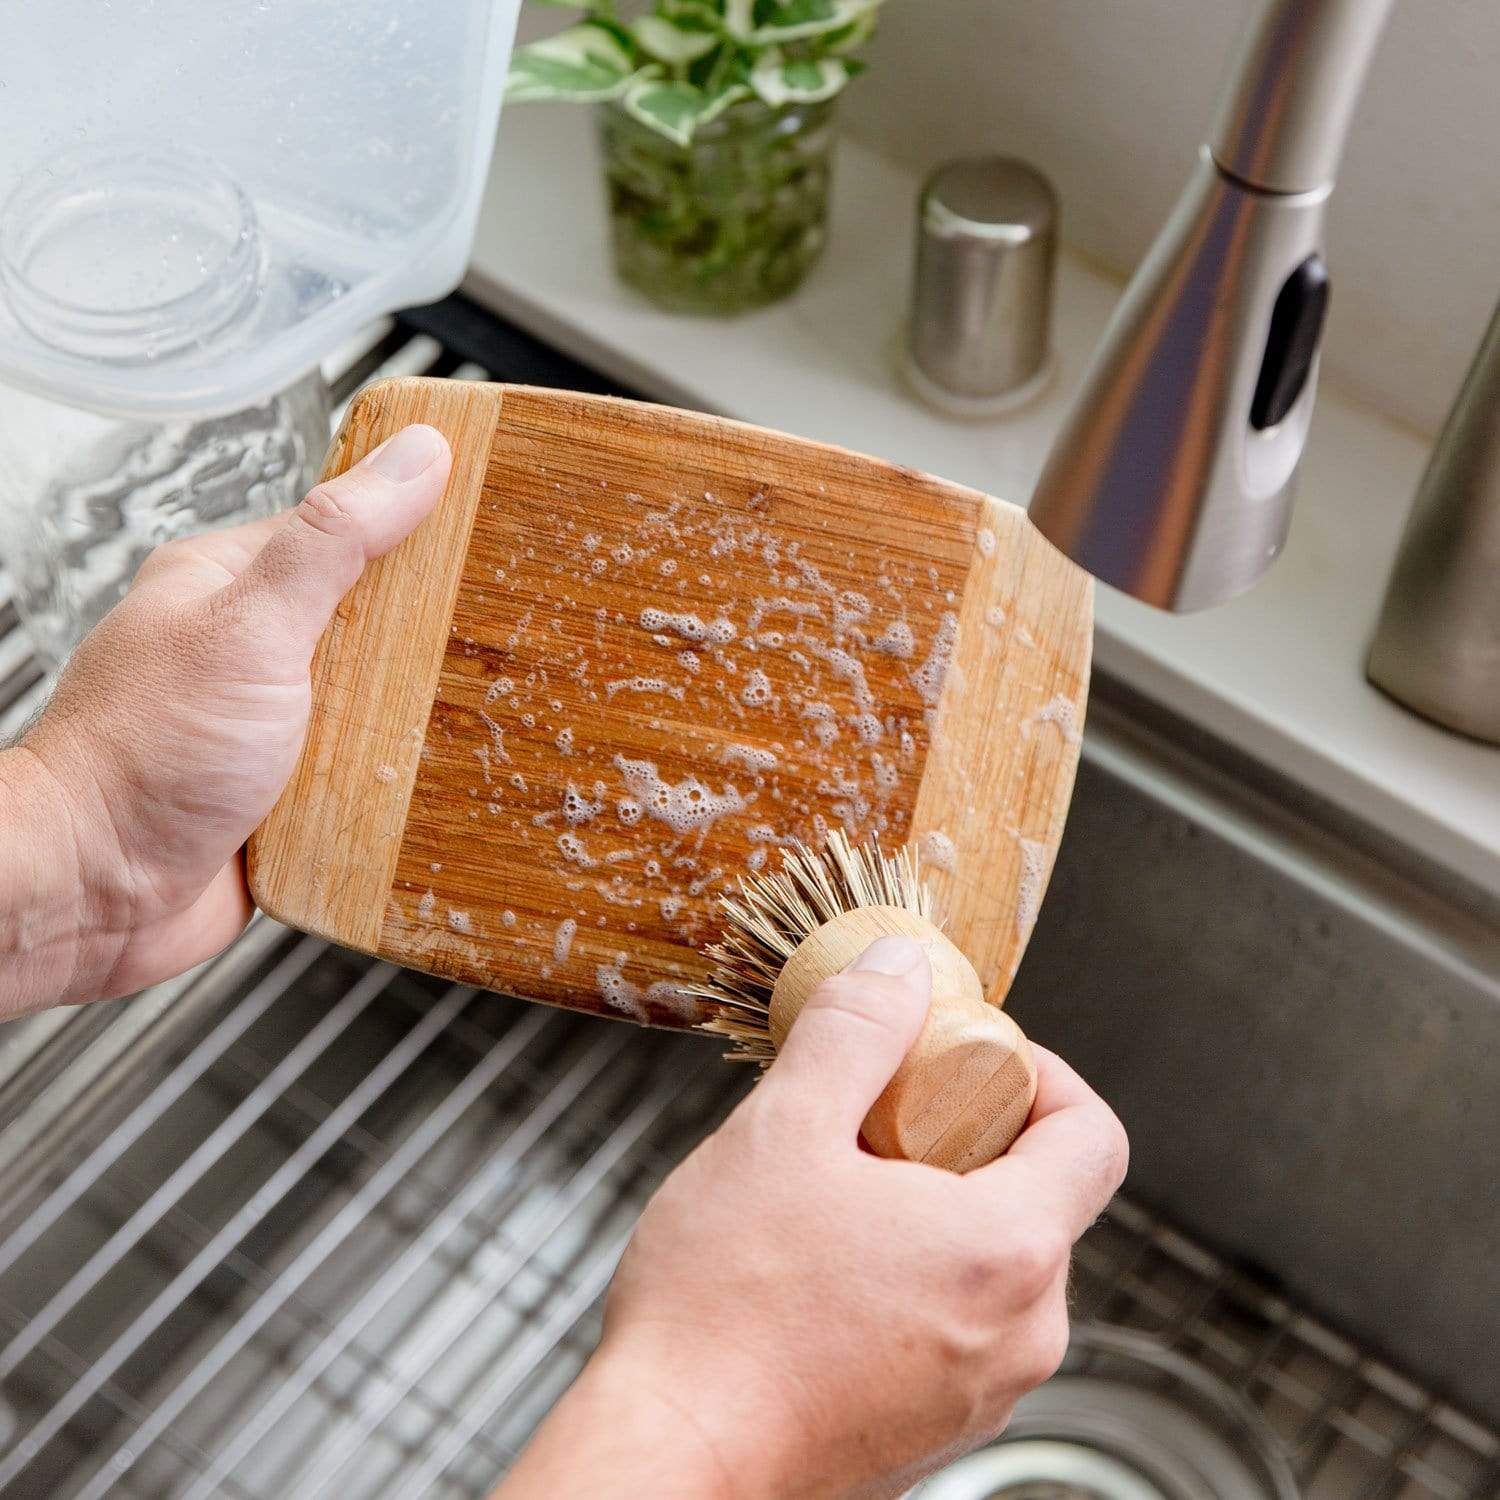 Hands using Pot Scrubber to wash a small bamboo cutting board over a stainless steel sink